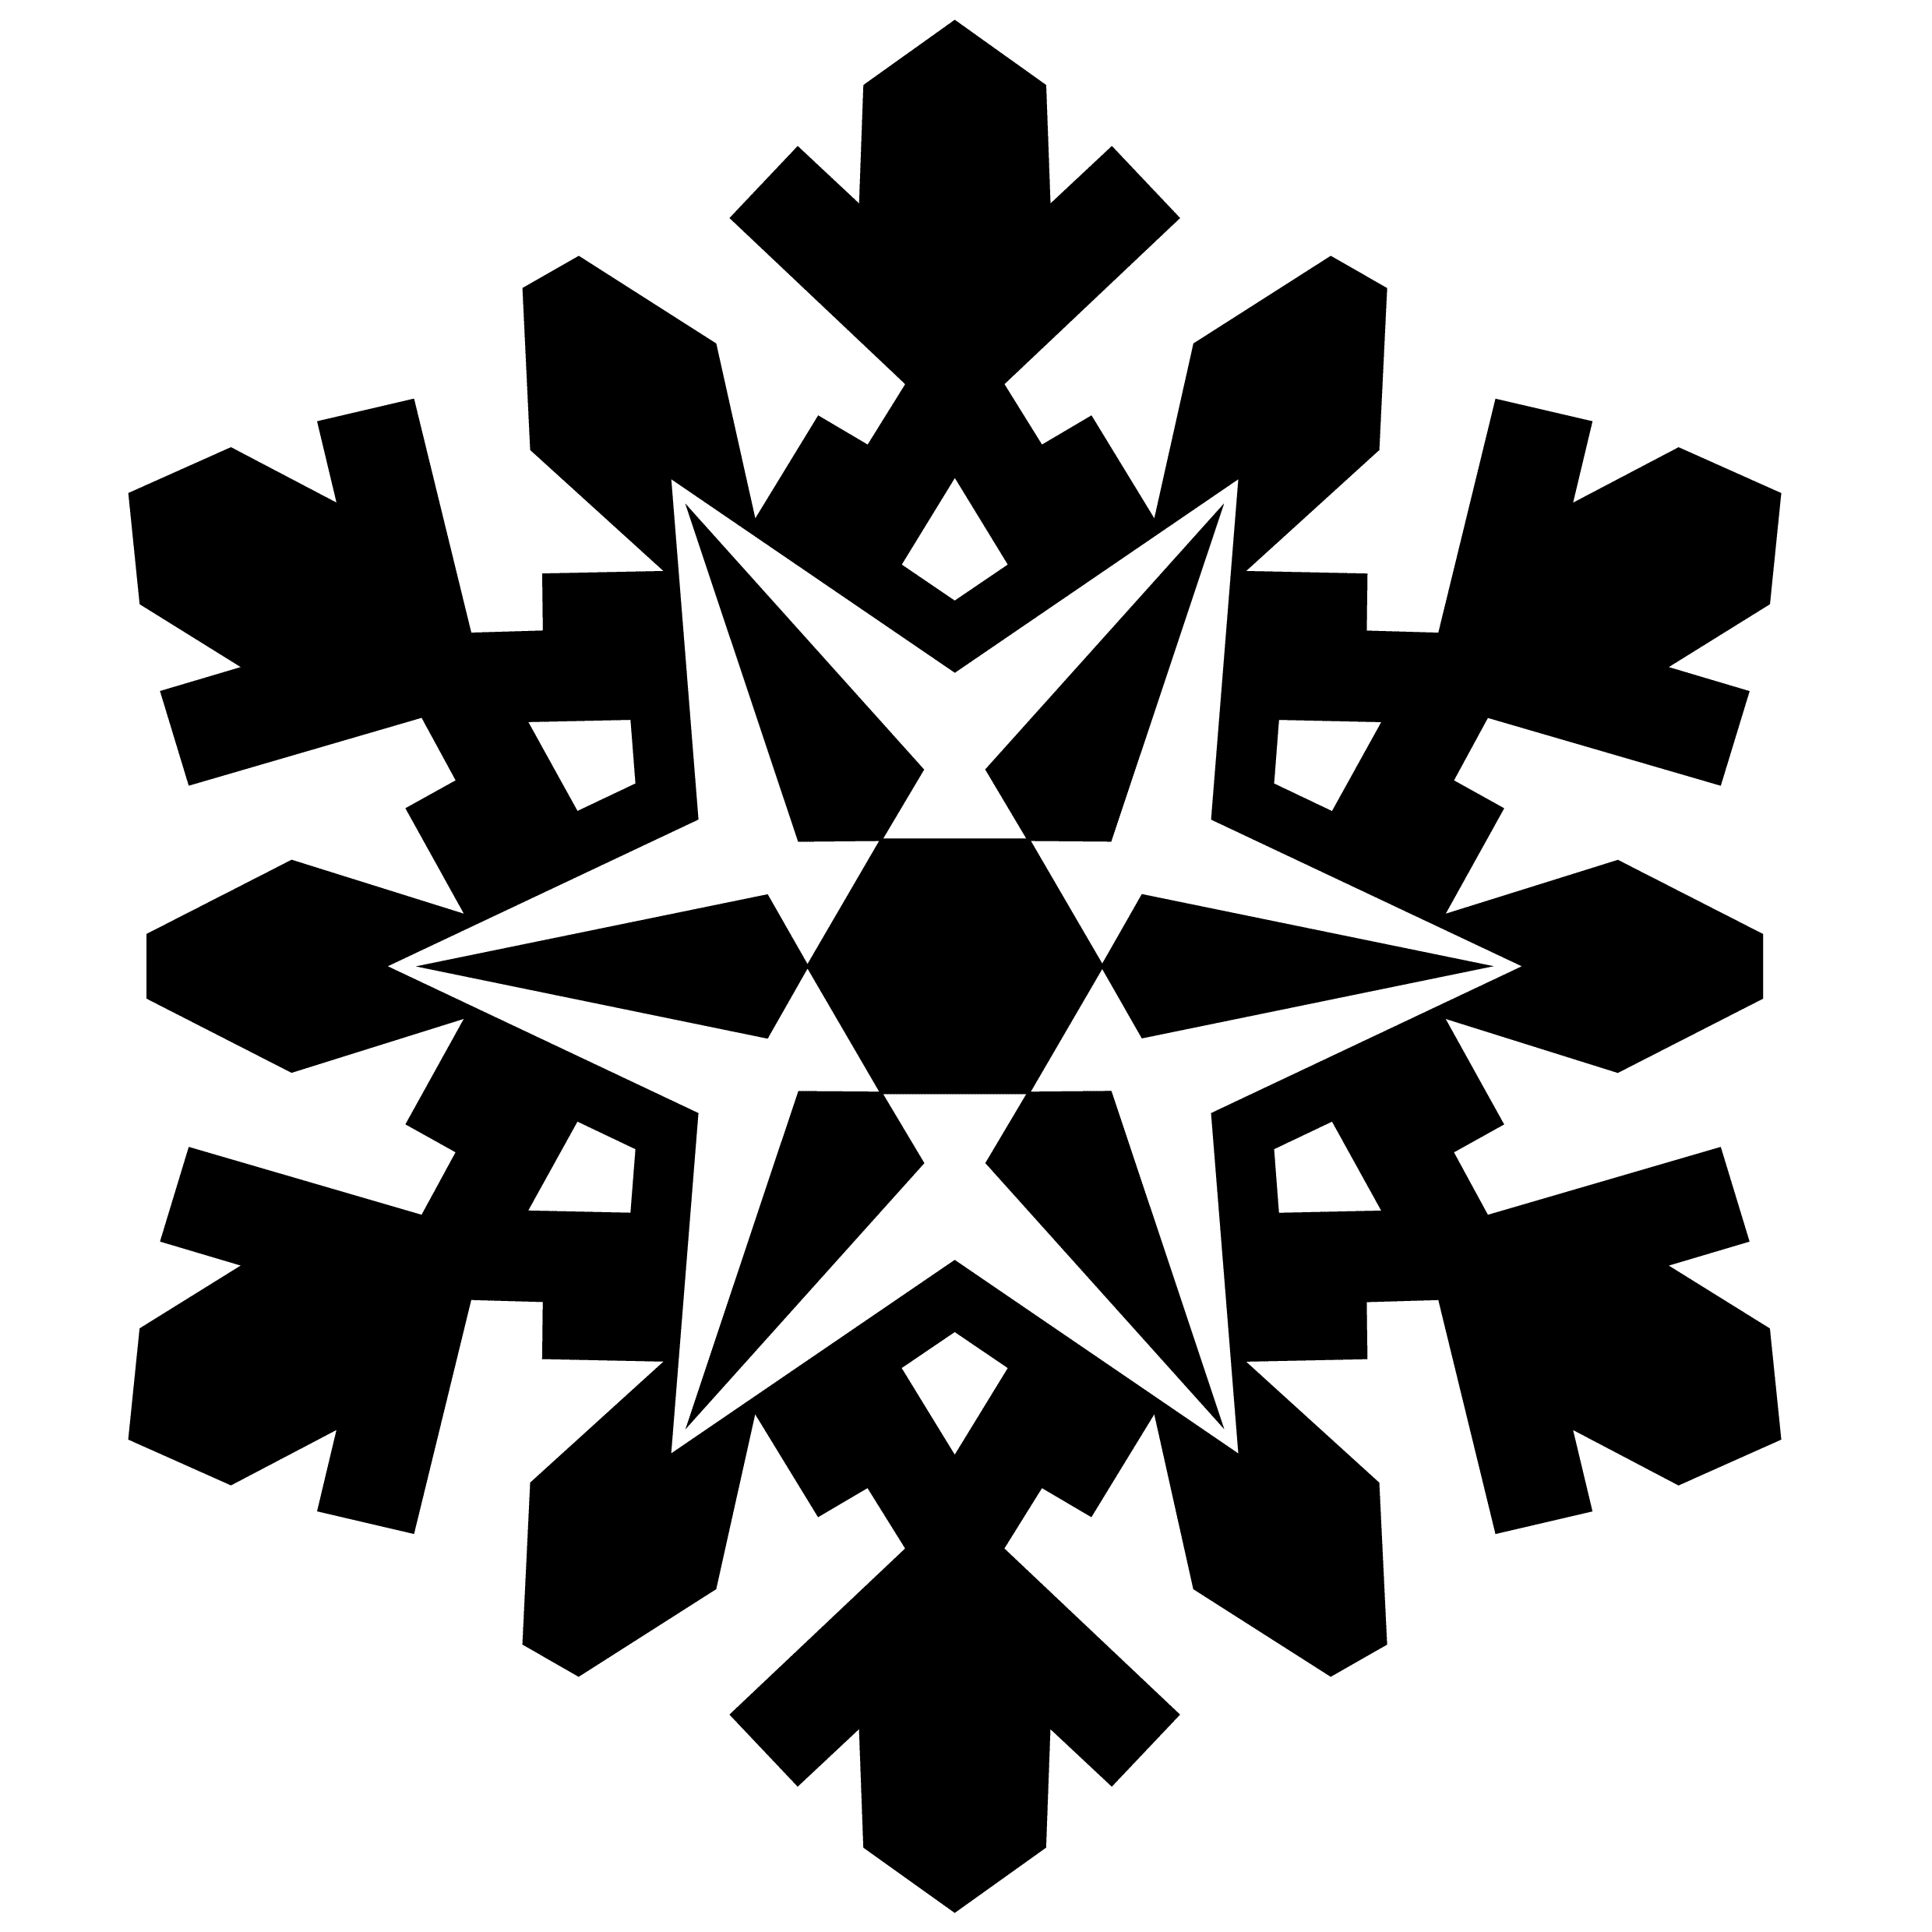 52 Snowflakes Vectors, Silhouette and Photoshop Brushes for ...